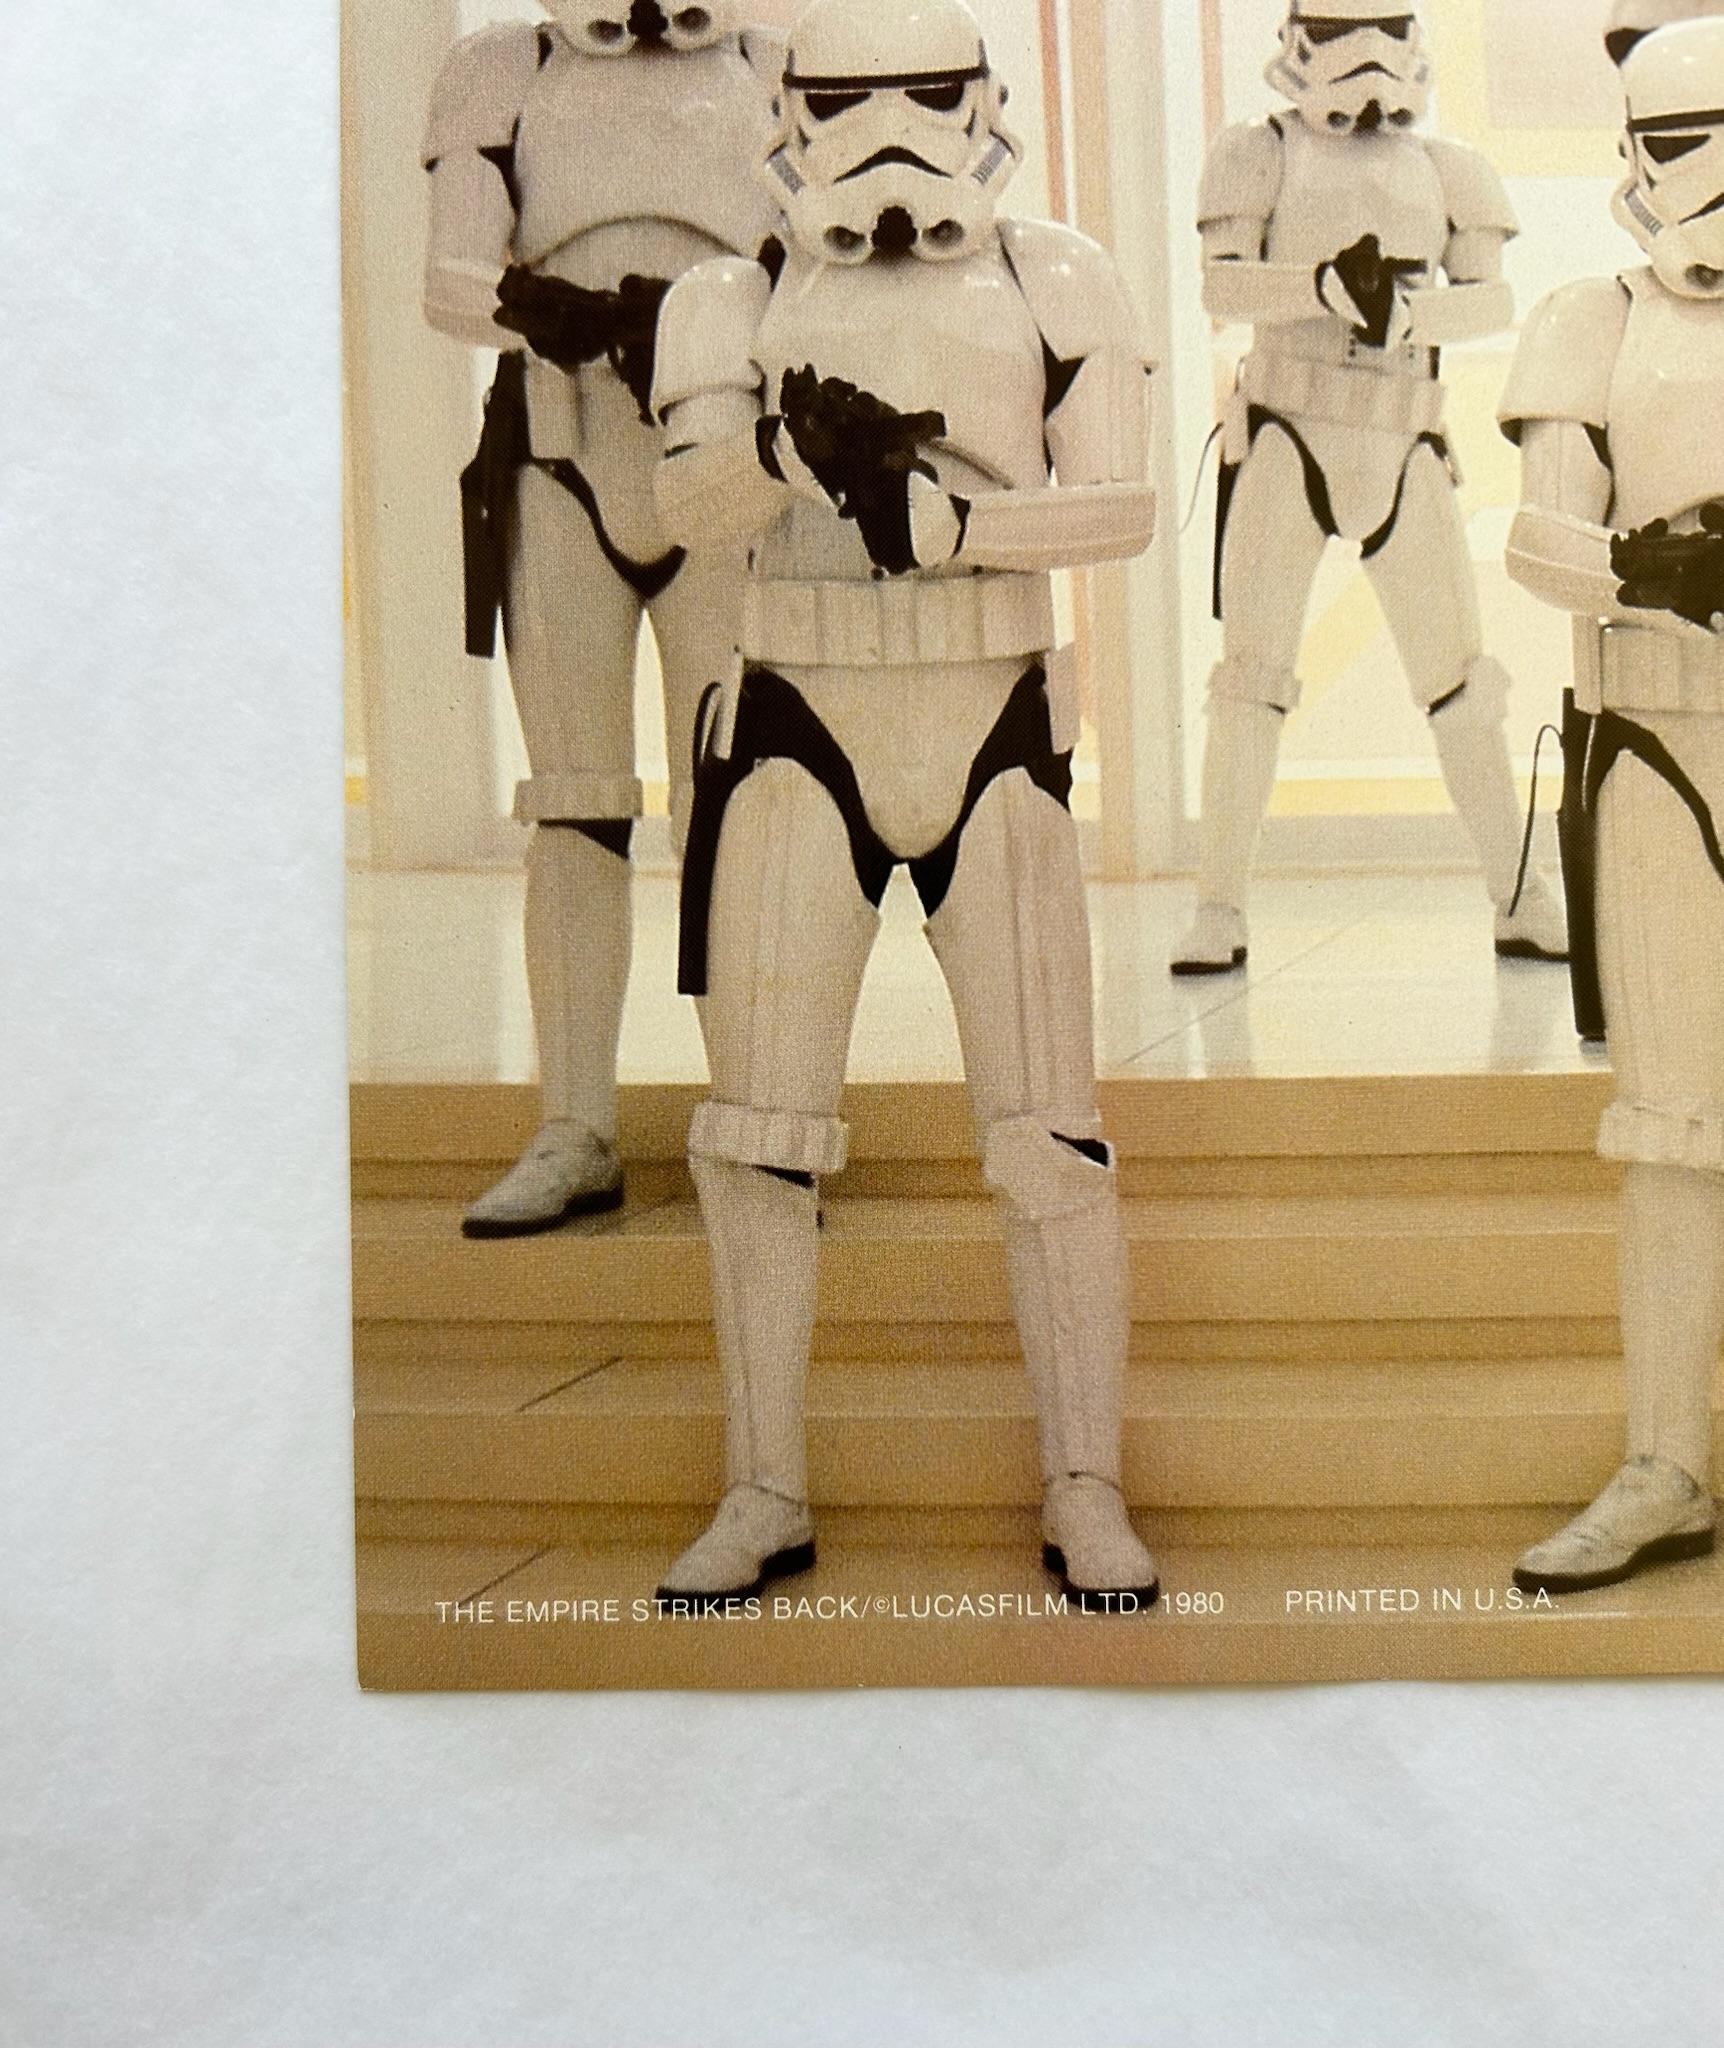 Star Wars: The Empire Strikes Back 1980 Vintage Lobby Card #14

Original Star Wars lobby card of Storm Troopers on the death star

Framing options available: Black, brown, white and perspex 

Condition: Excellent 

Size: 10 x 8 

Shipping - 1 day